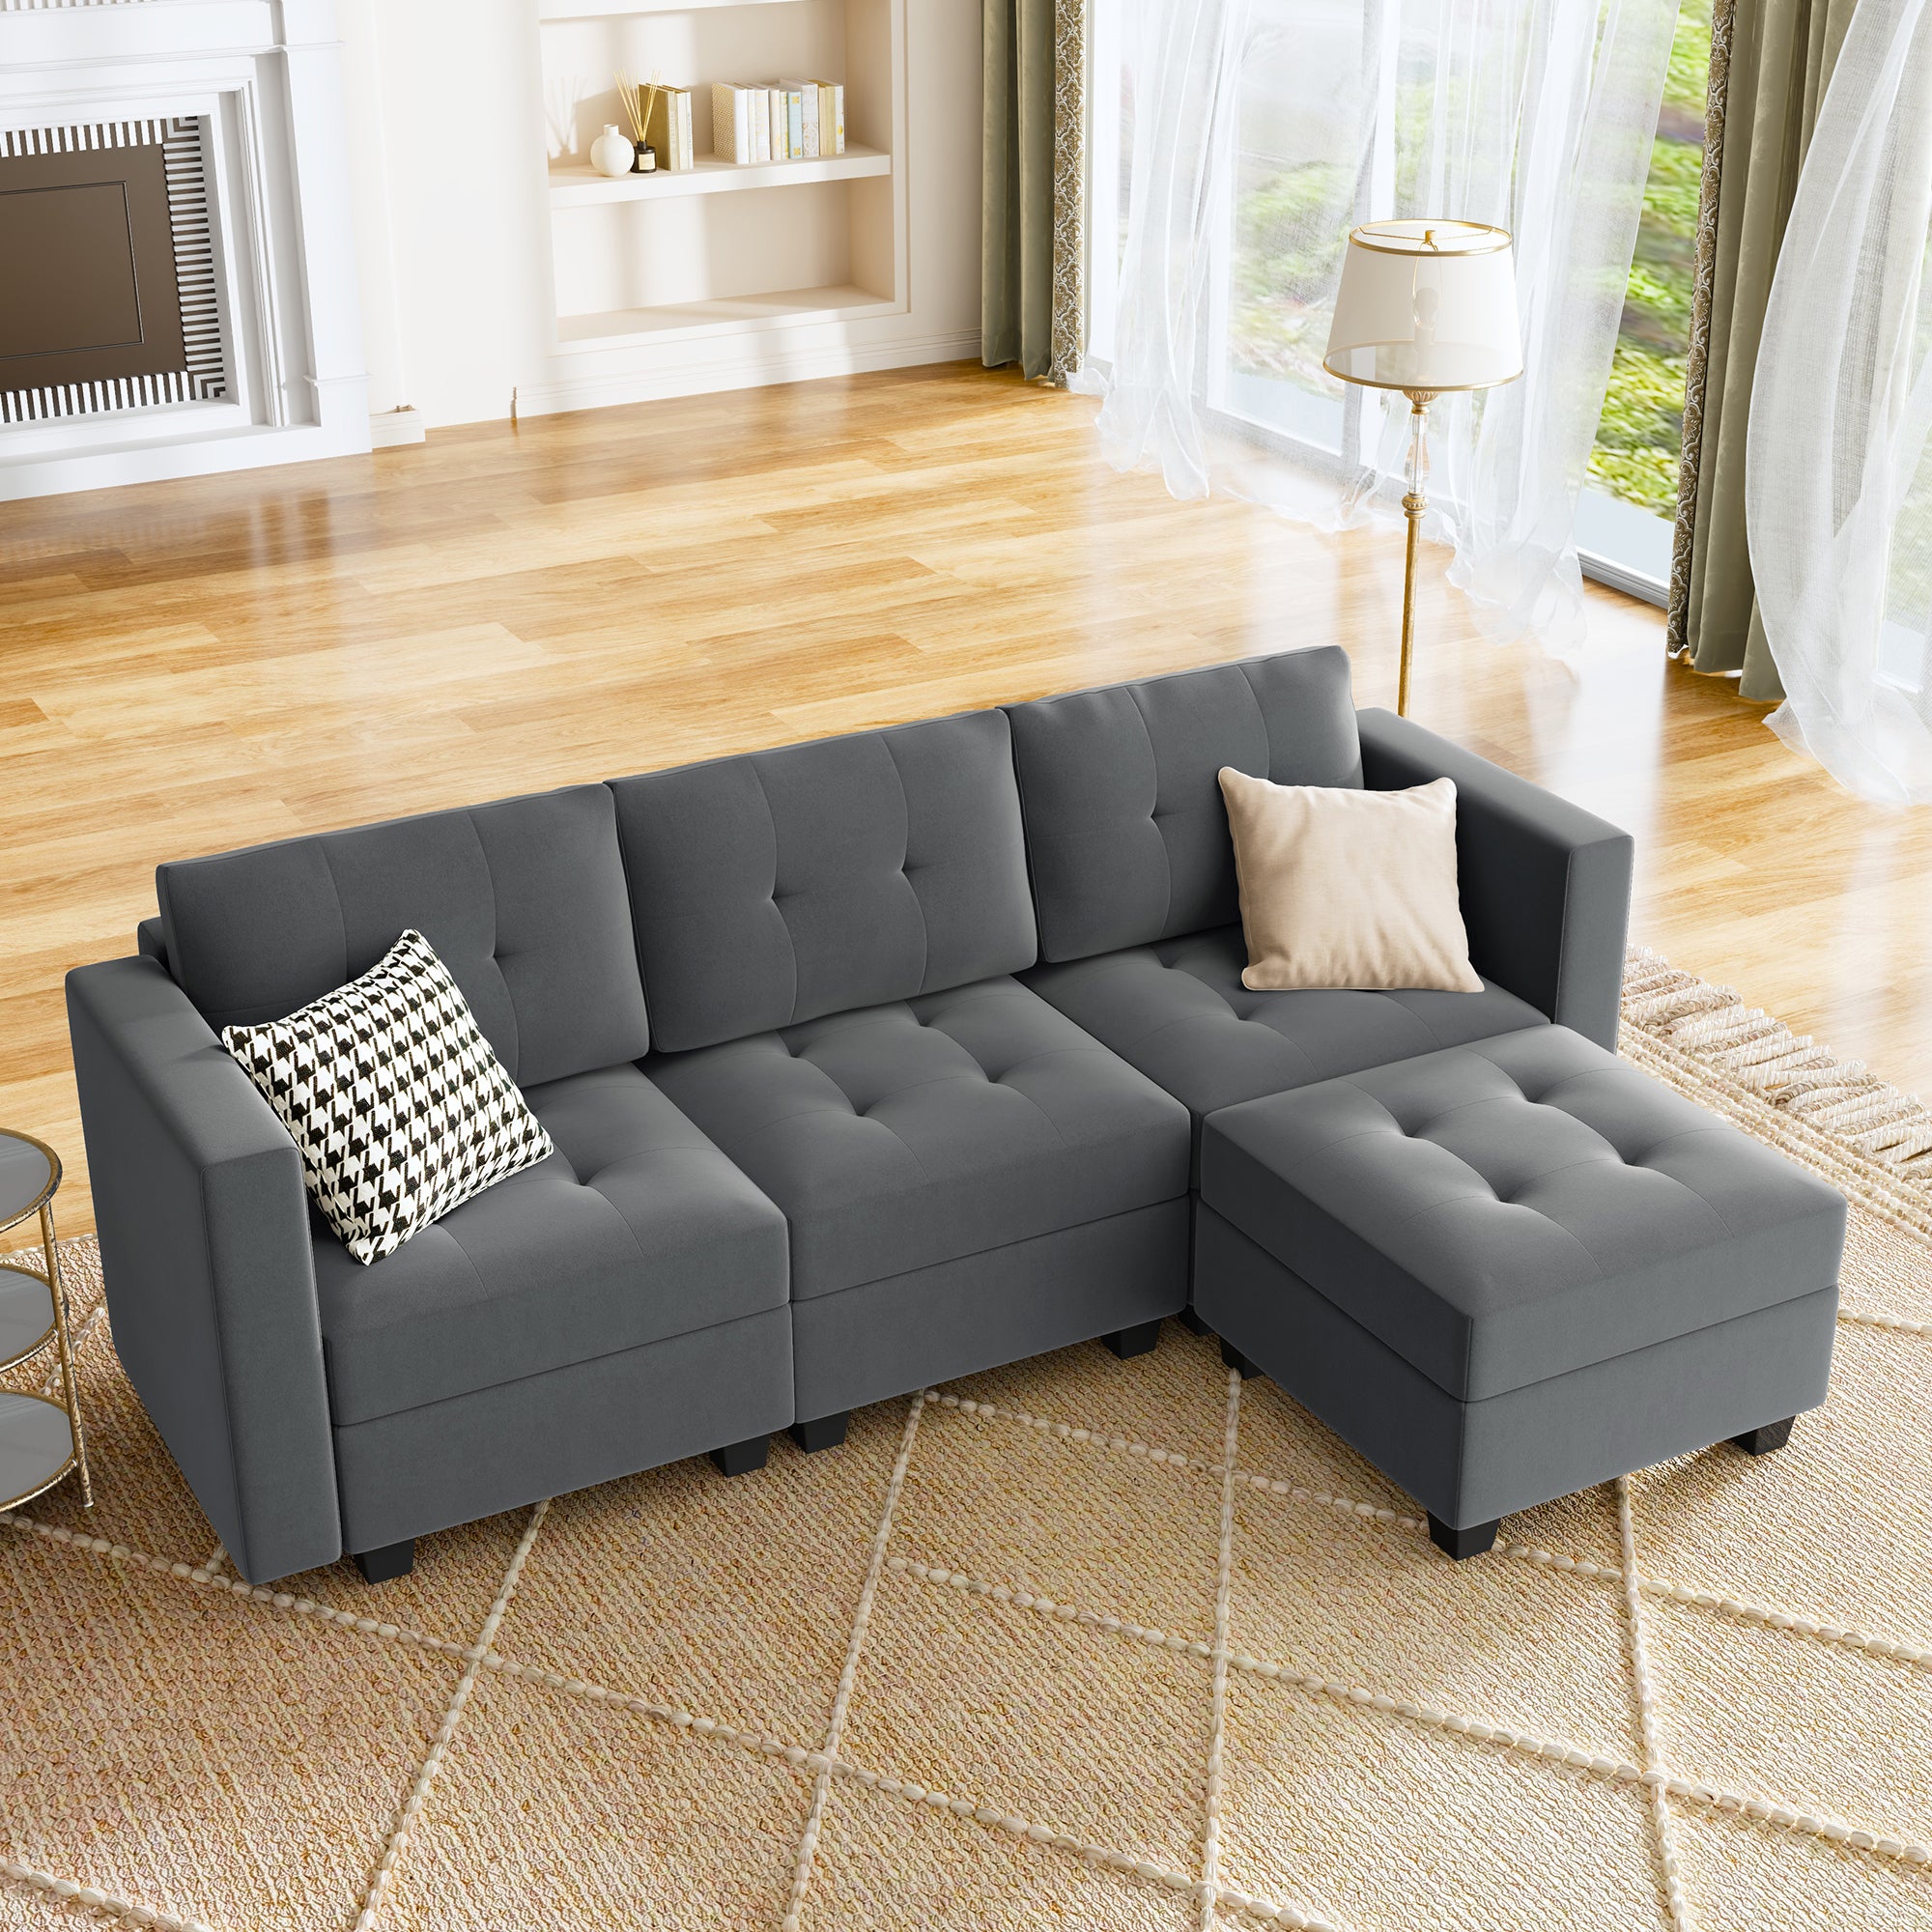 HONBAY Velvet Tufted 3-Seat L-Shaped Modular Sofa with Storage & Reversible Chaise